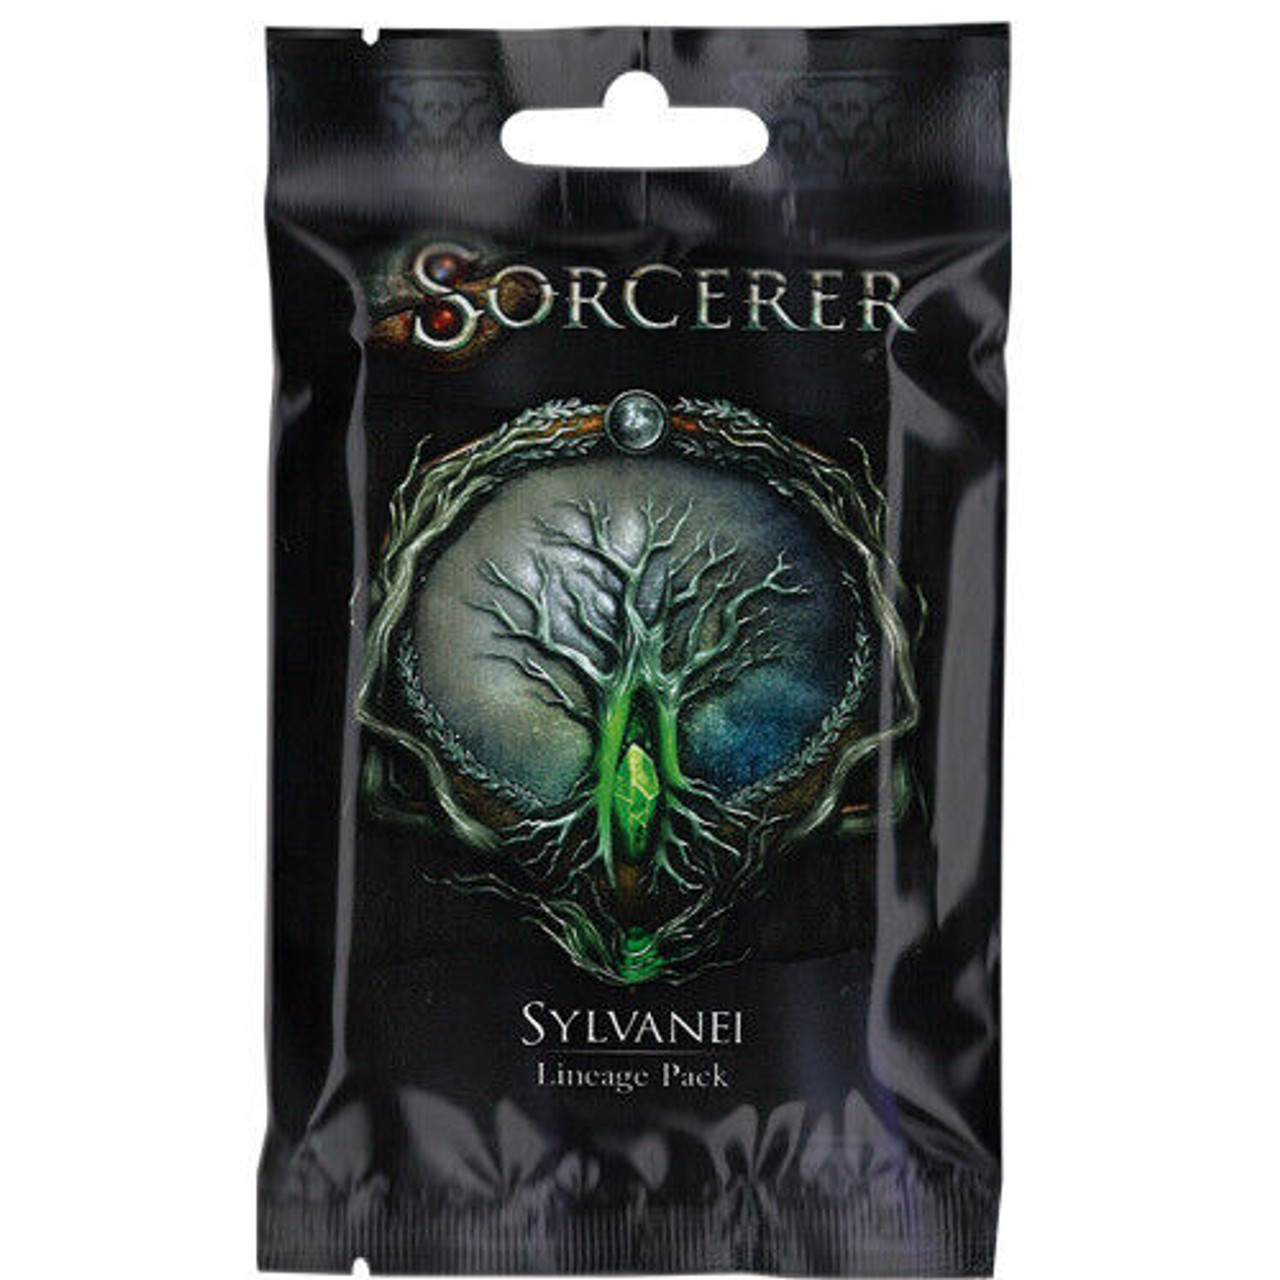 Sorcerer: Sylvanei Lineage Pack -=NEW=-